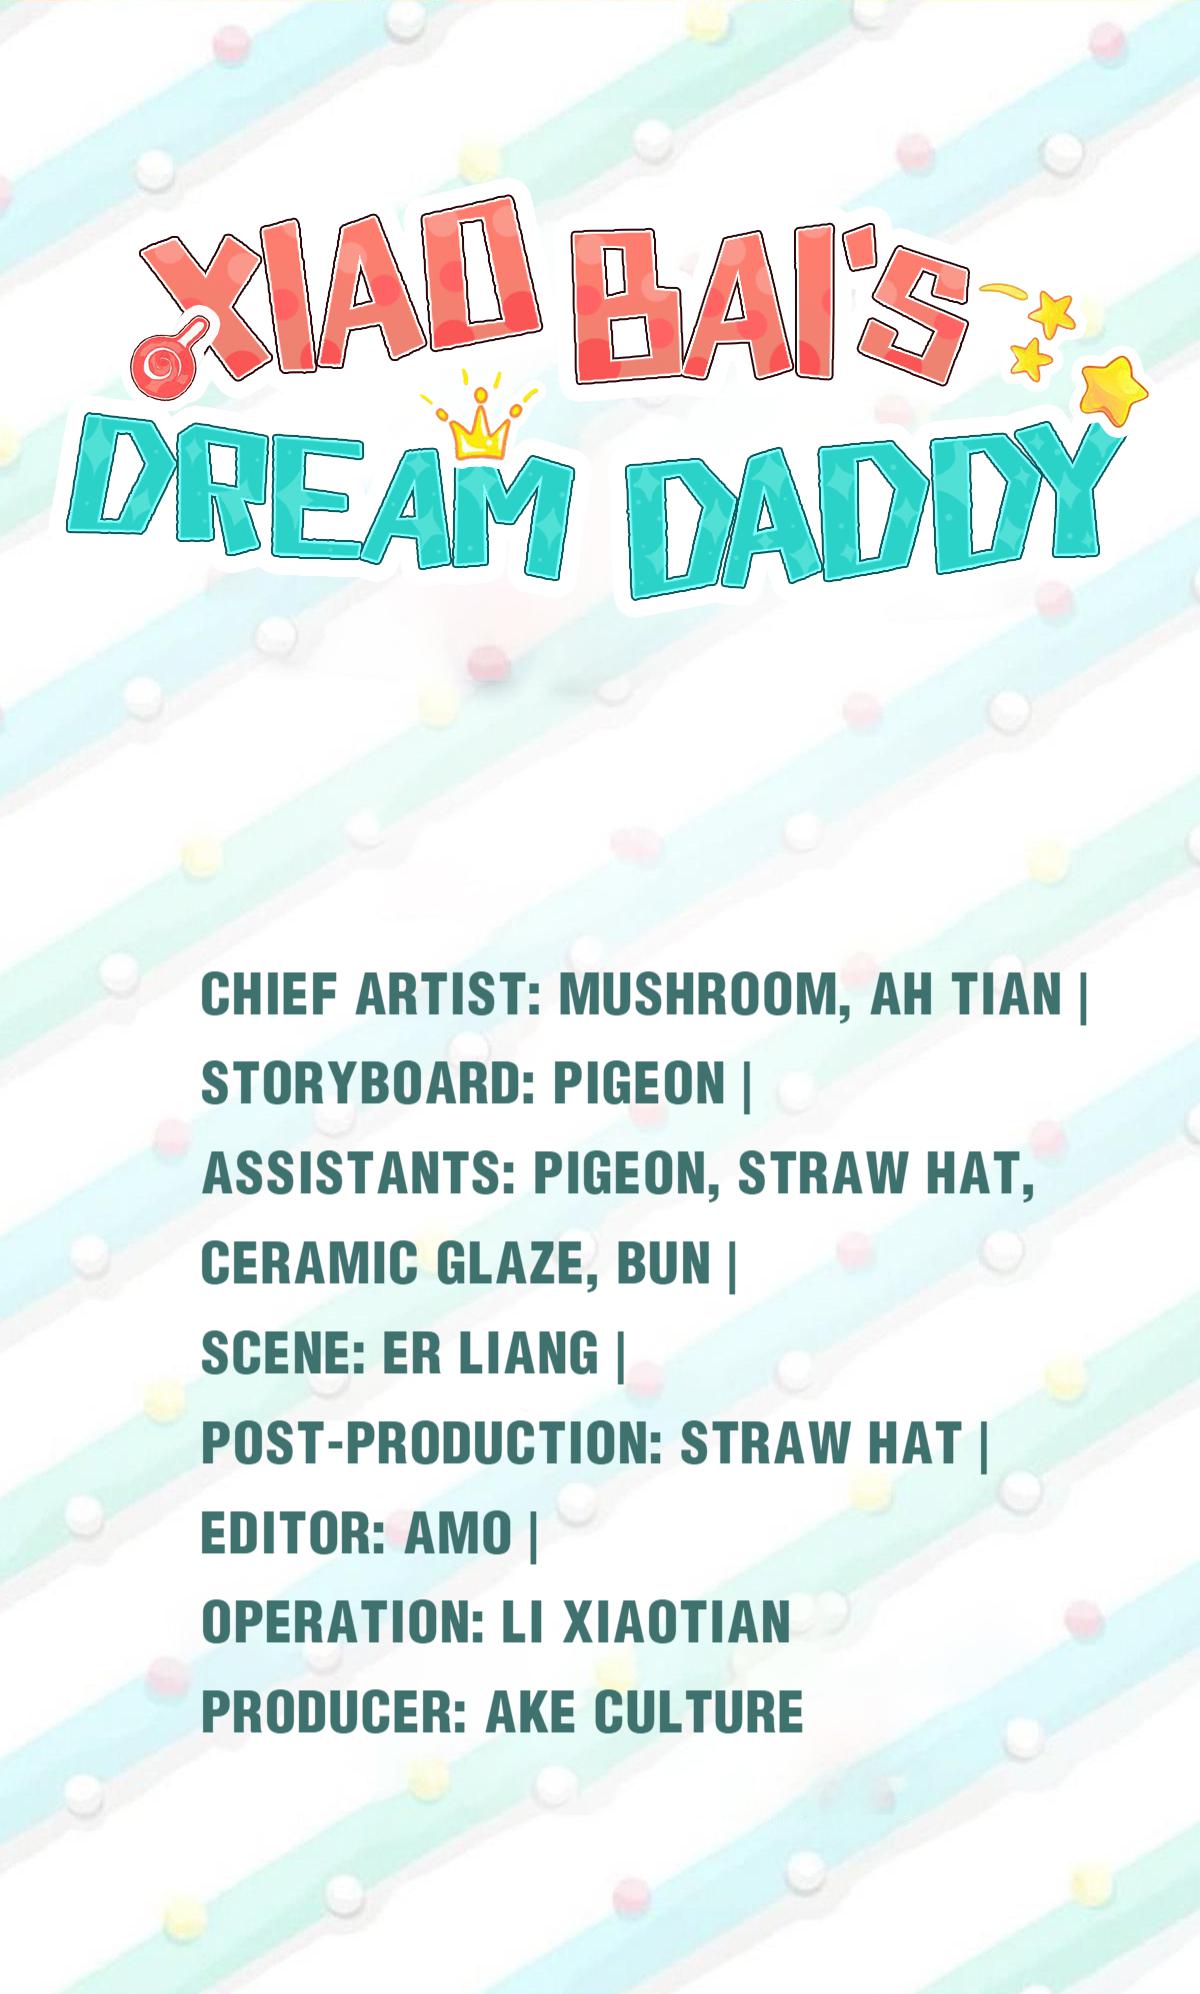 Xiaobai's Dream Daddy - Page 2